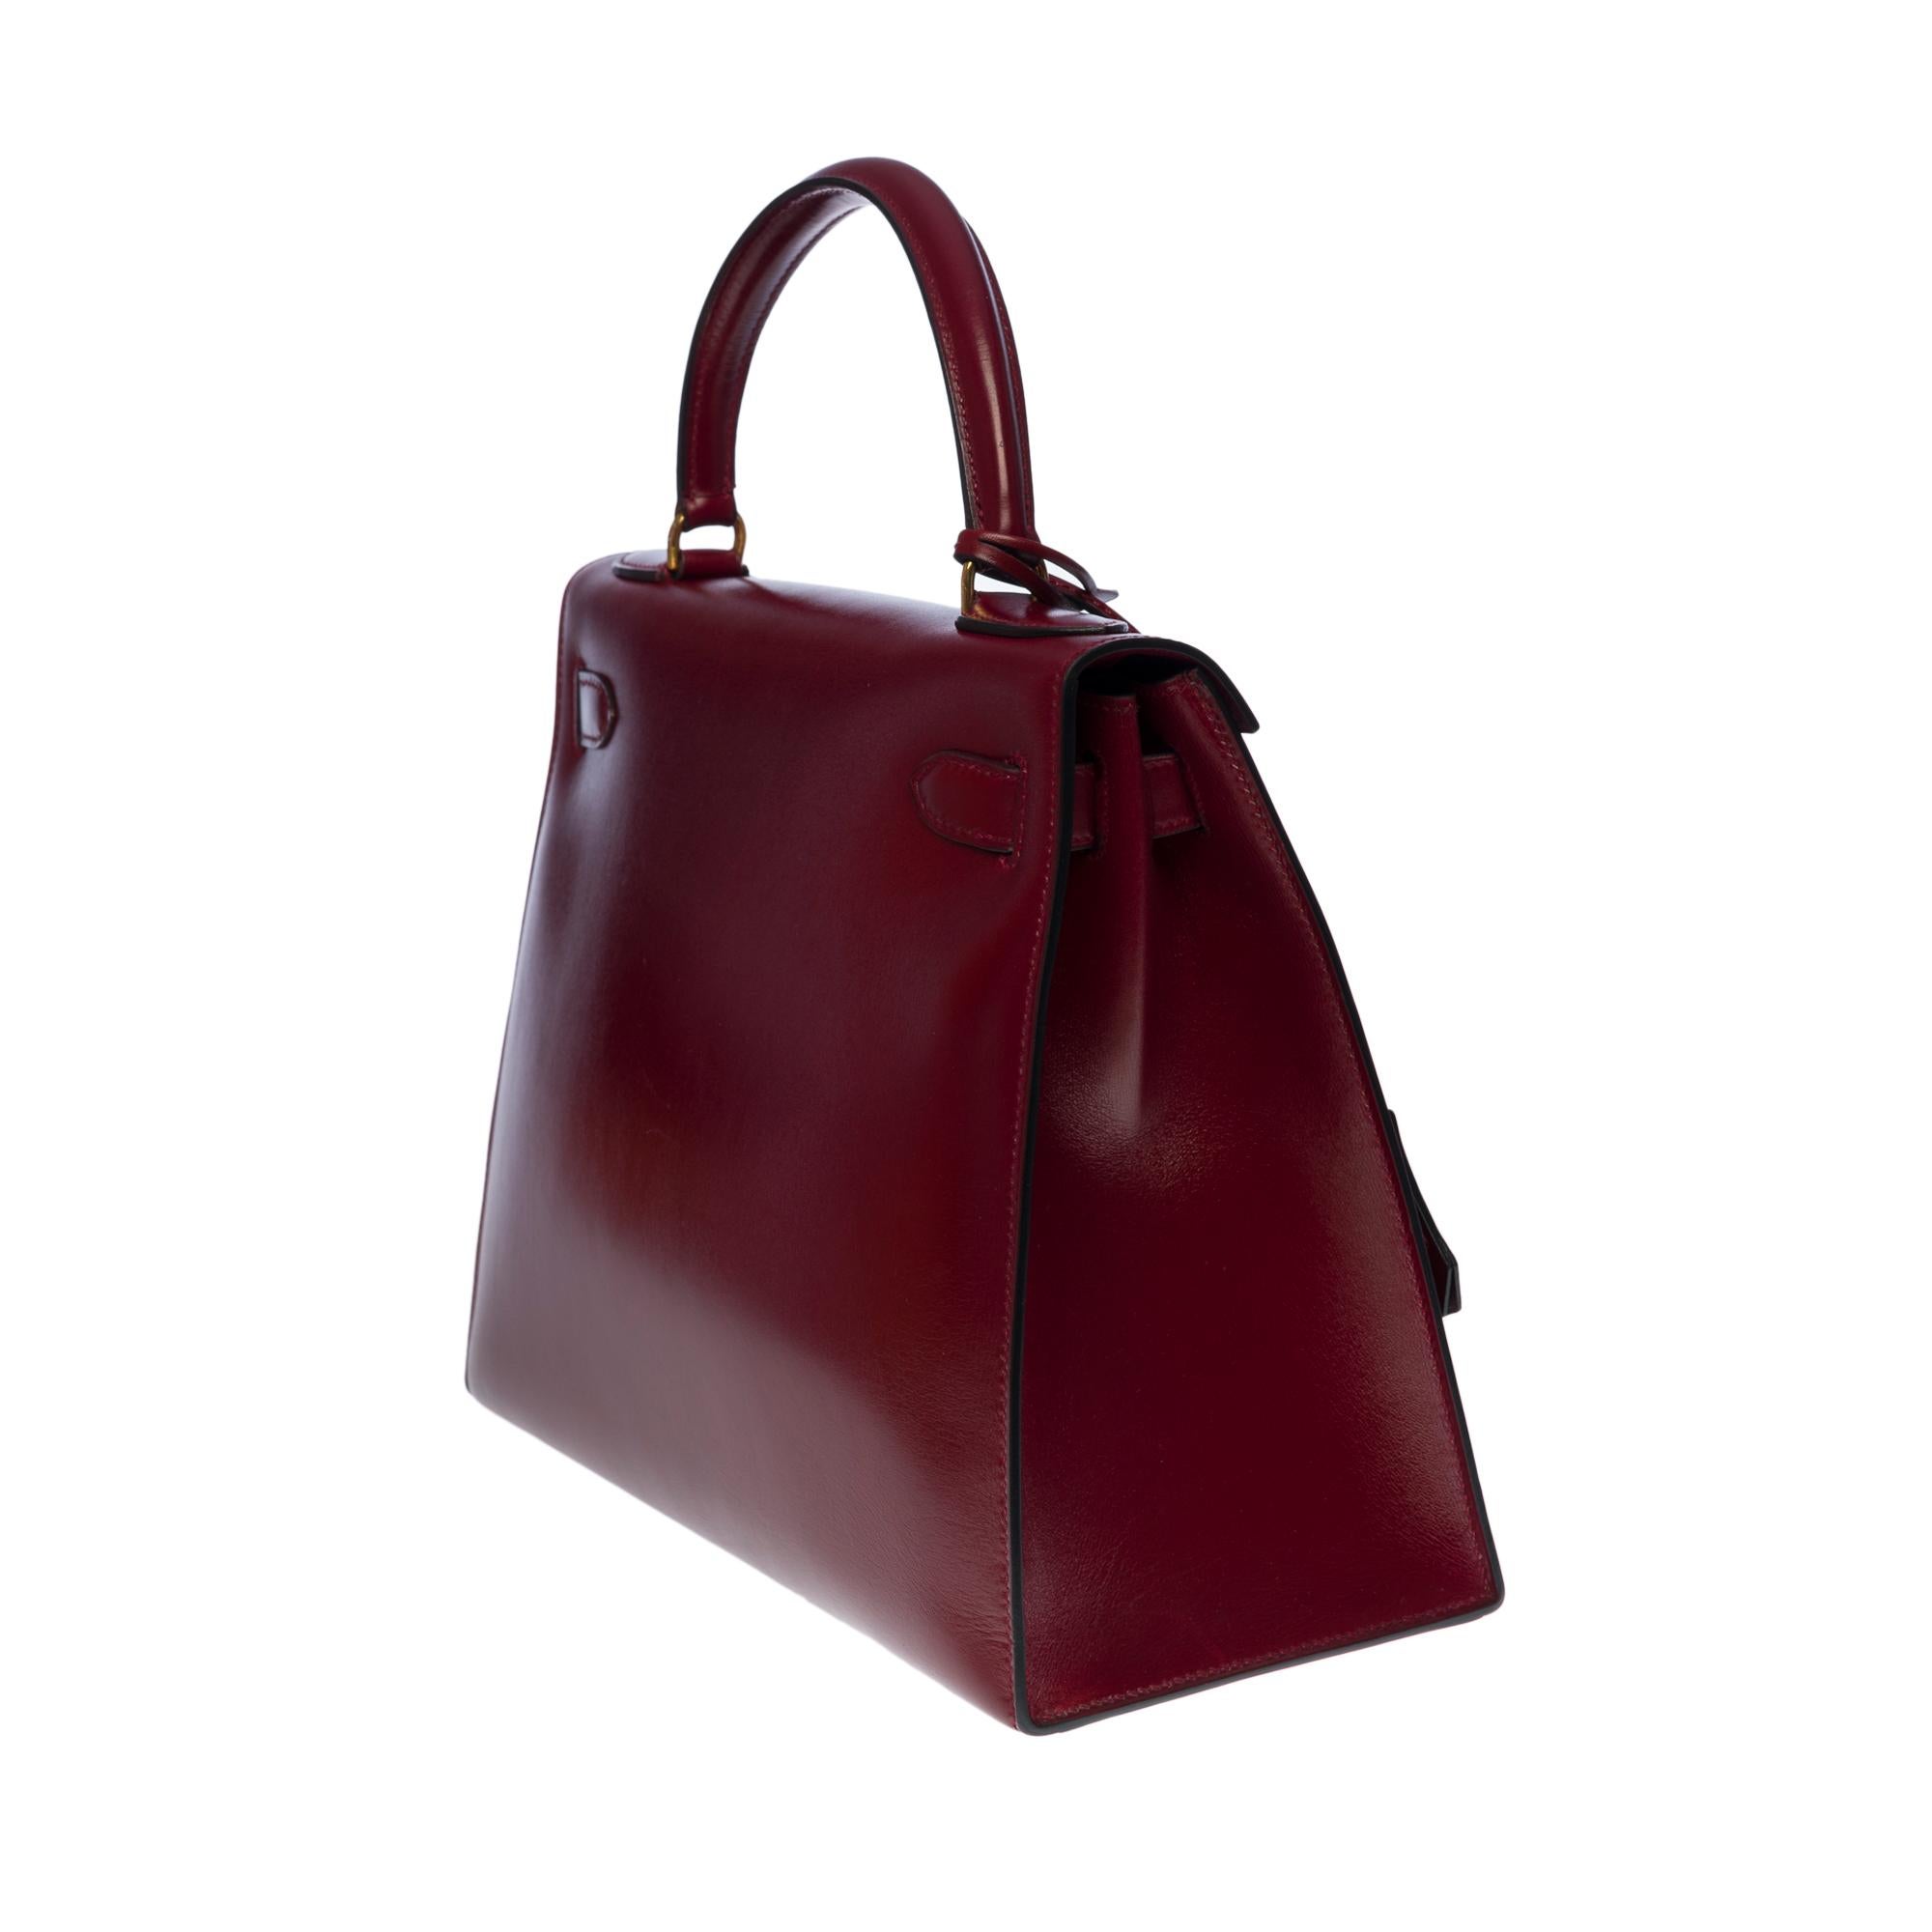 Amazing Hermes Kelly 28 sellier handbag in Rouge H box calf leather, GHW In Excellent Condition In Paris, IDF